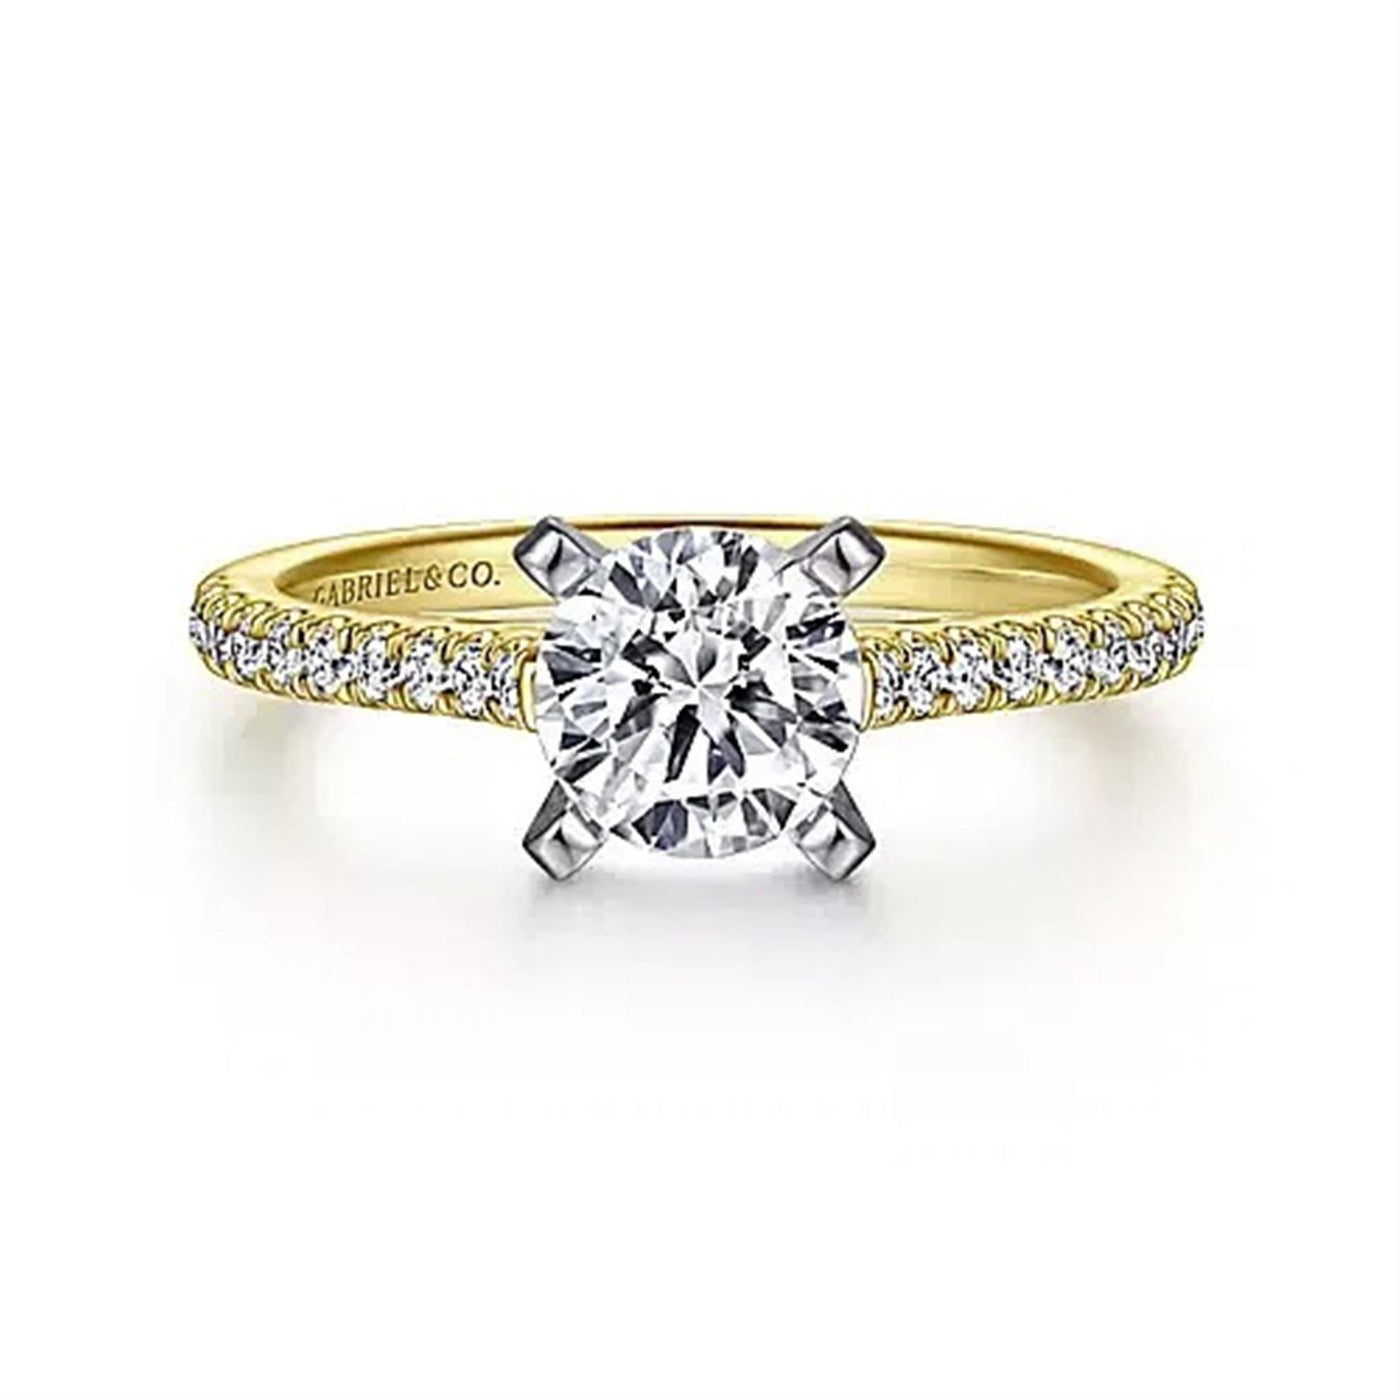 Gabriel - Classic Collection 14K White & Yellow Gold .24ctw 4 Prong Style Diamond Semi-Mount Engagement Ring